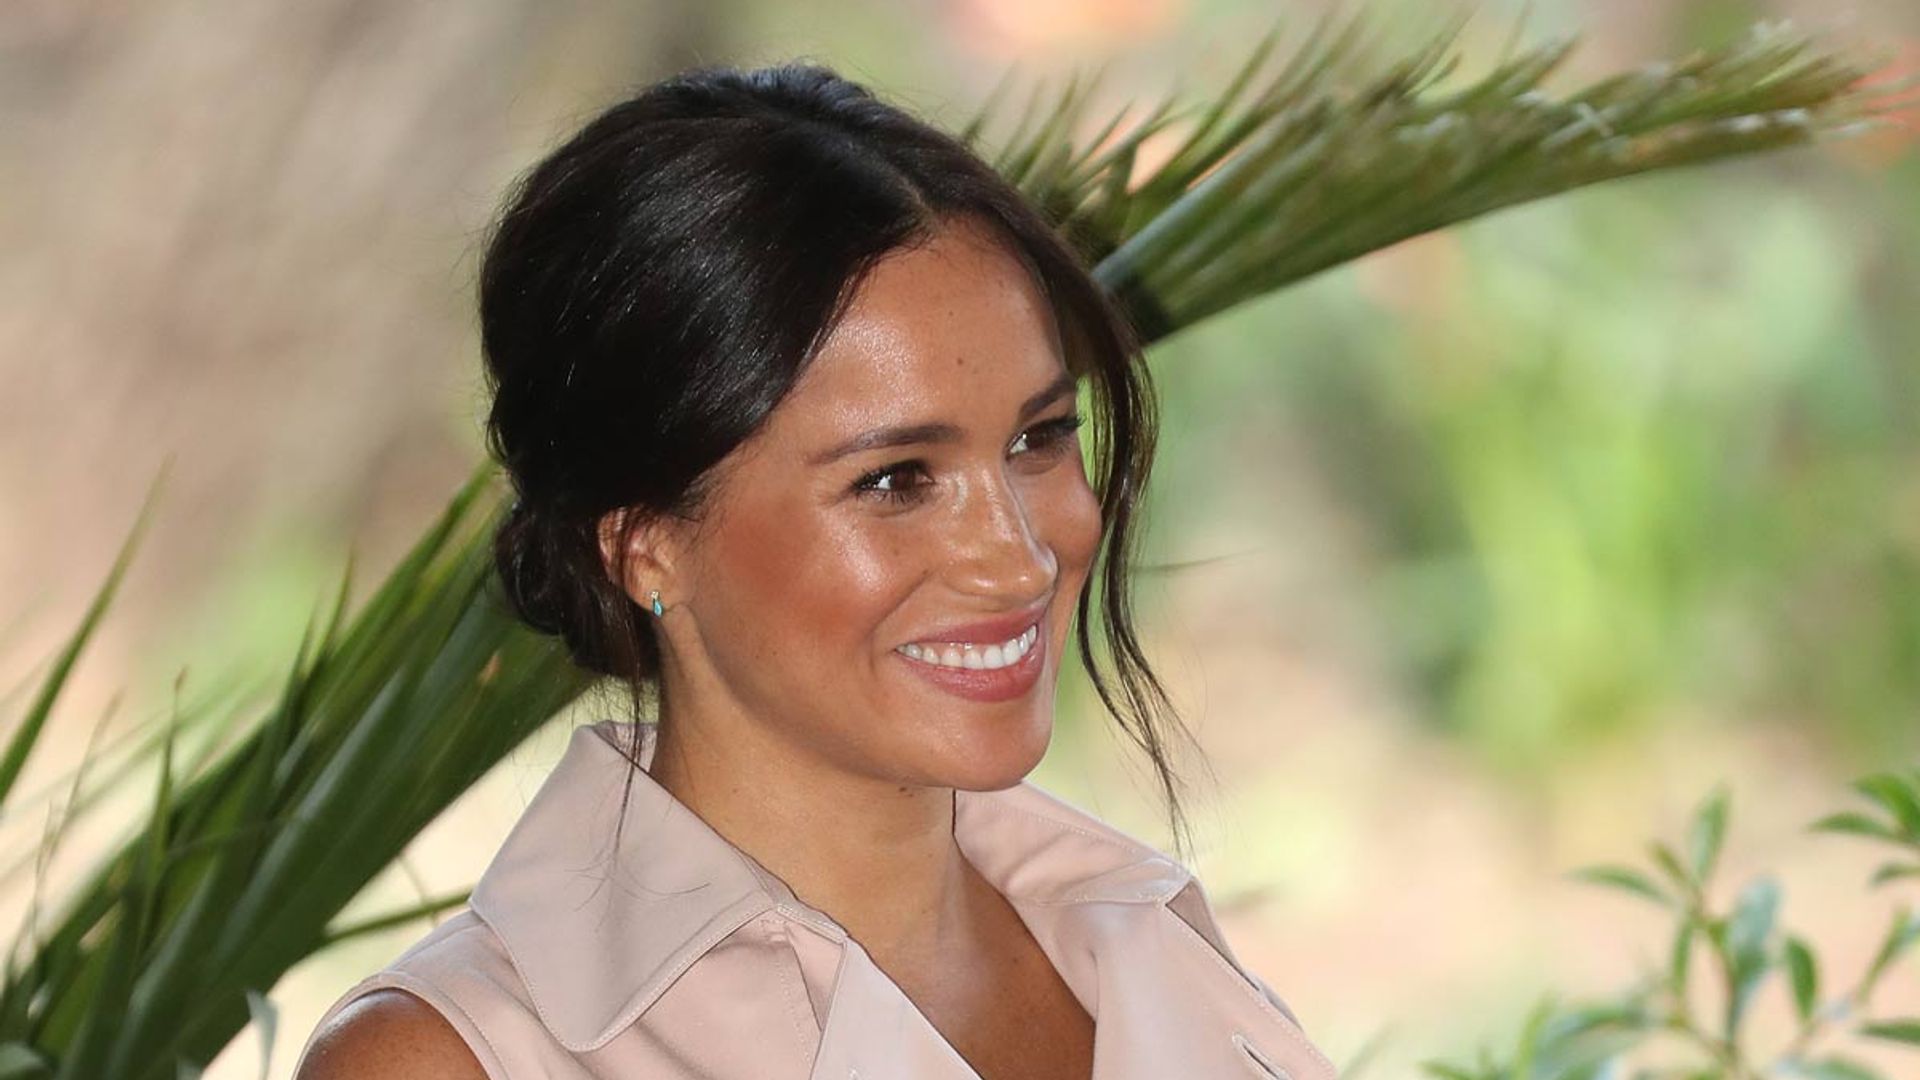 Can we talk about Meghan Markle's highlighter? We look at how experts recreate it